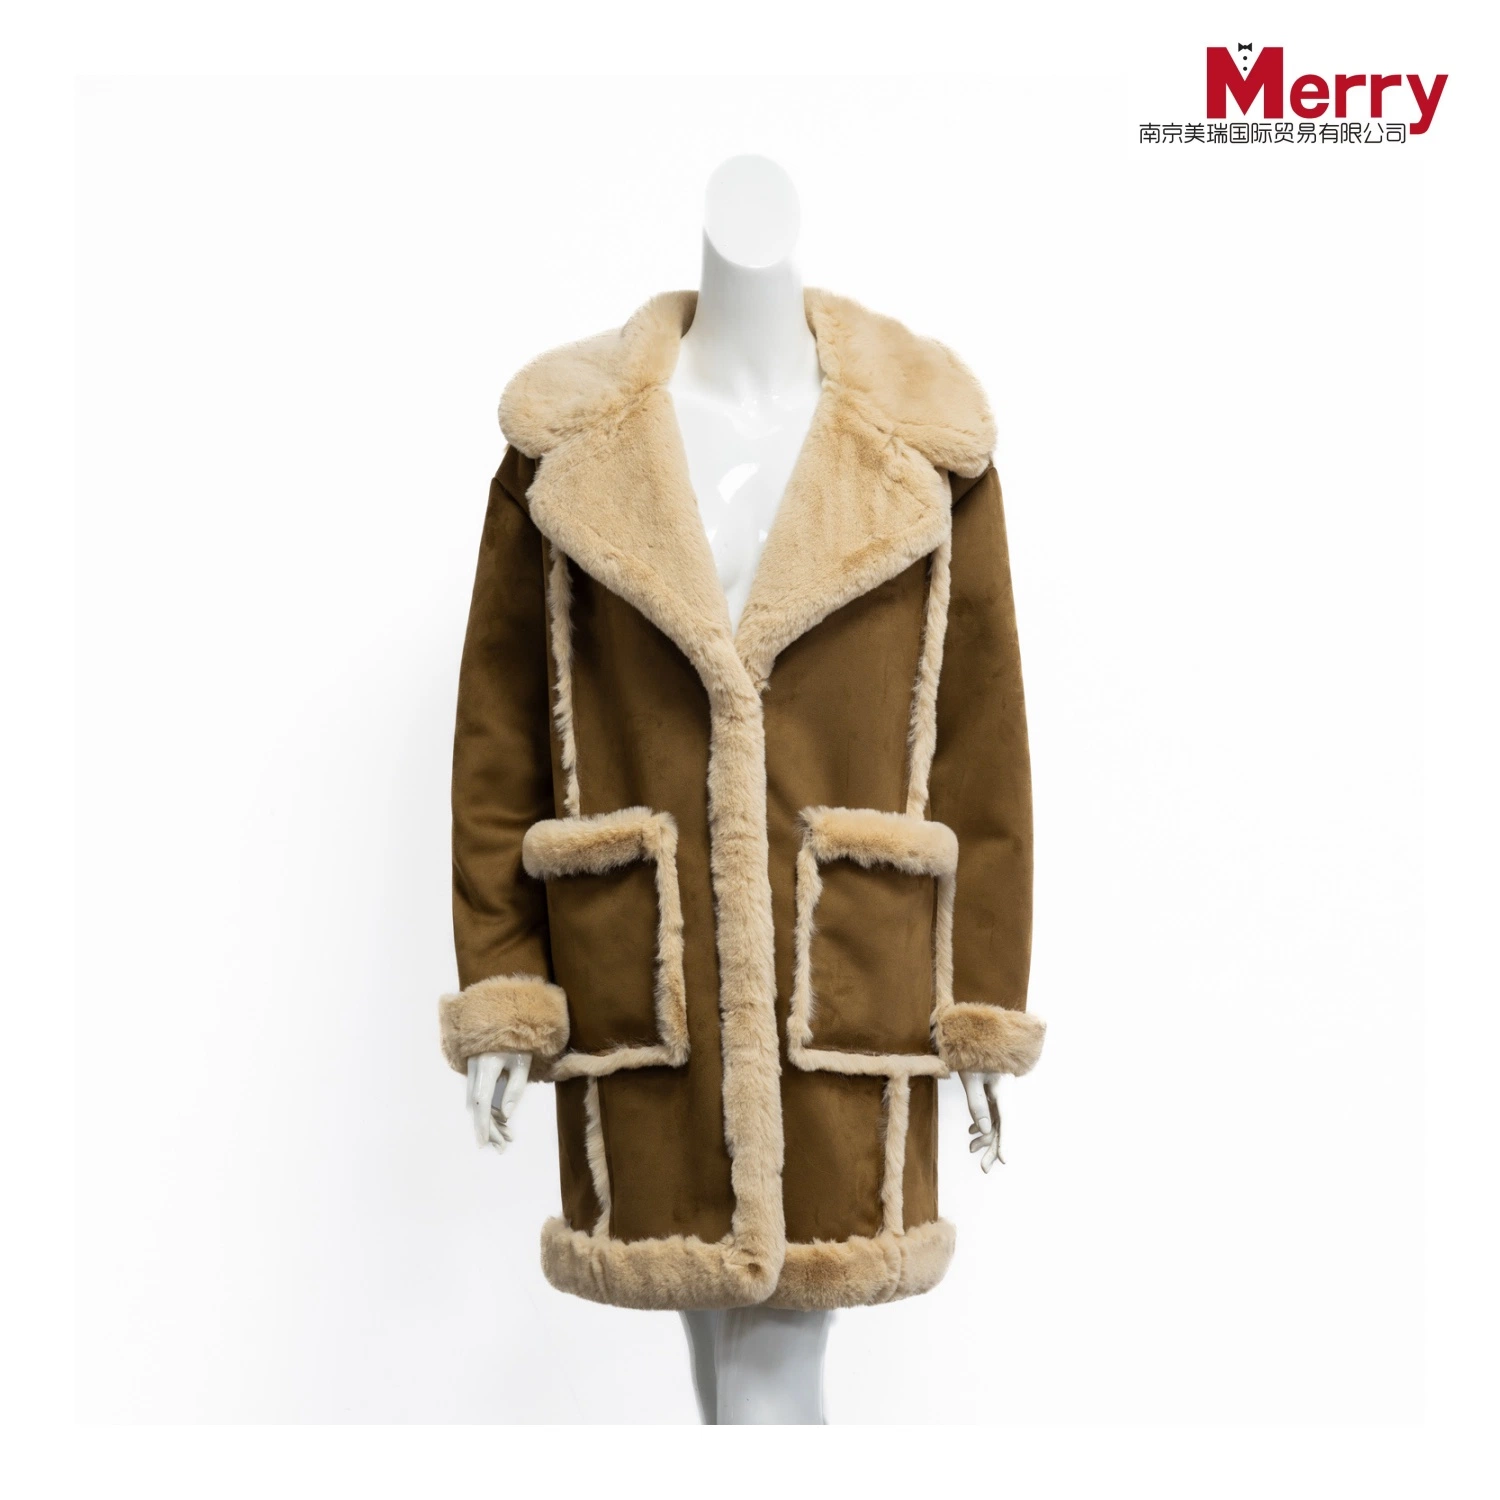 Women Winter Fur Coat Faux Leather Fashion Clothes Jacket with Lapel Collar